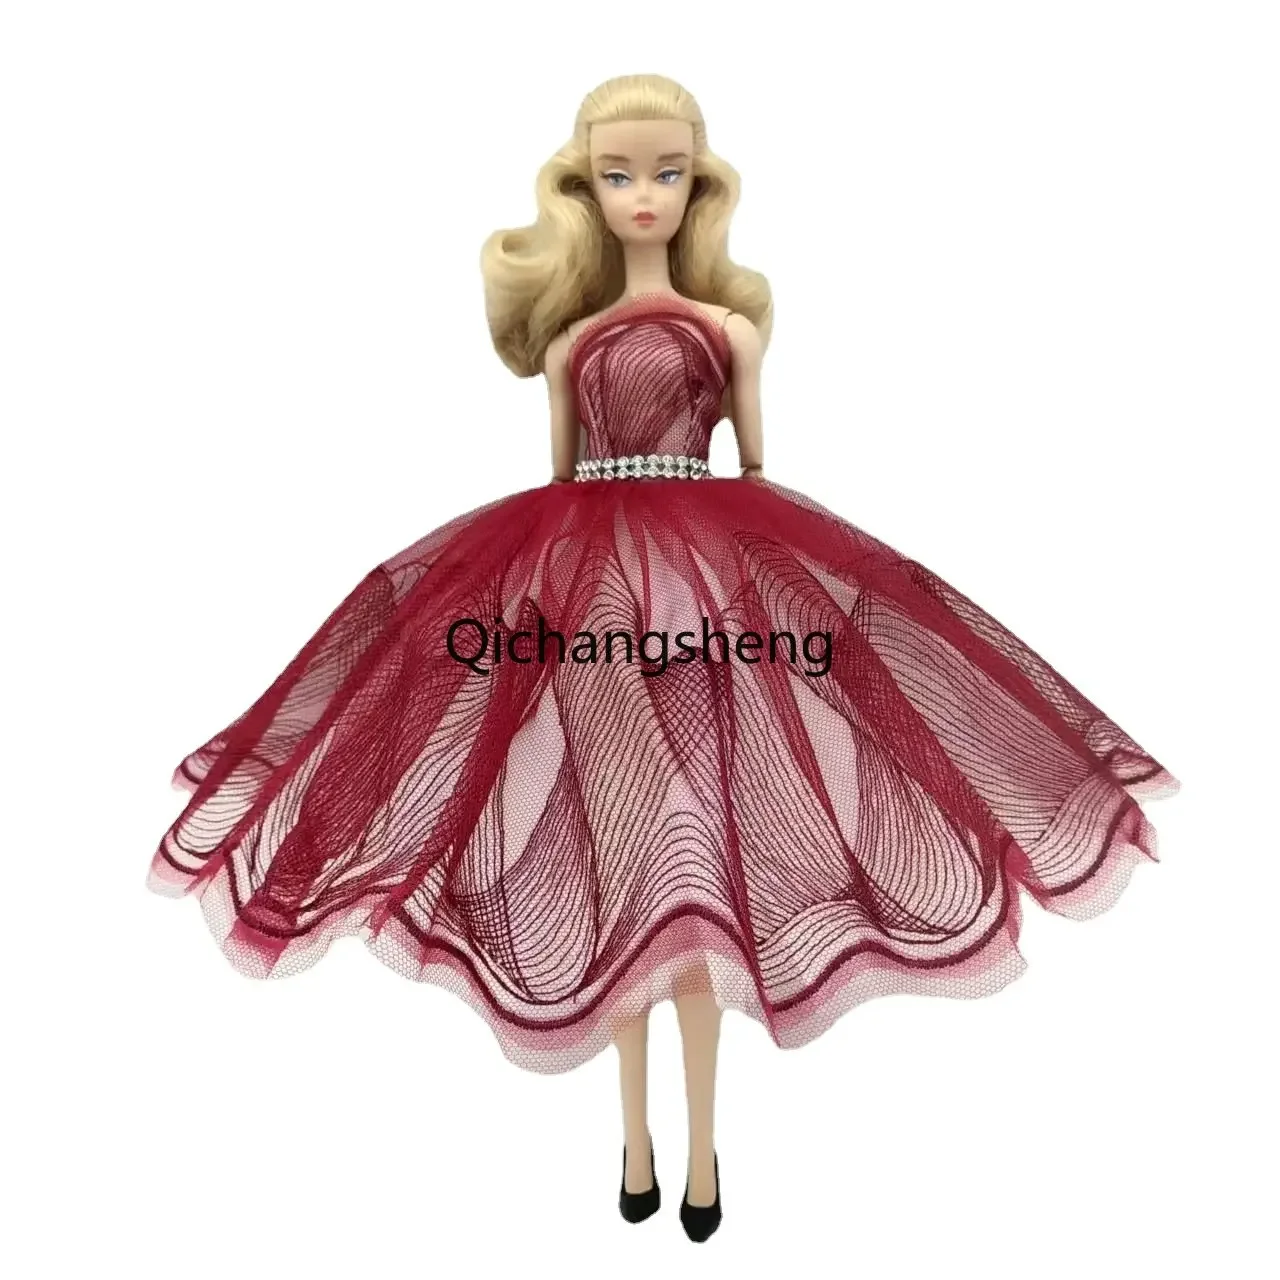 Wine Lace Evening Dress For Barbie Doll Clothes Outfits 1/6 Dolls Accessories Rhinestone 3-layer Skirt Princess Party Gown Toys